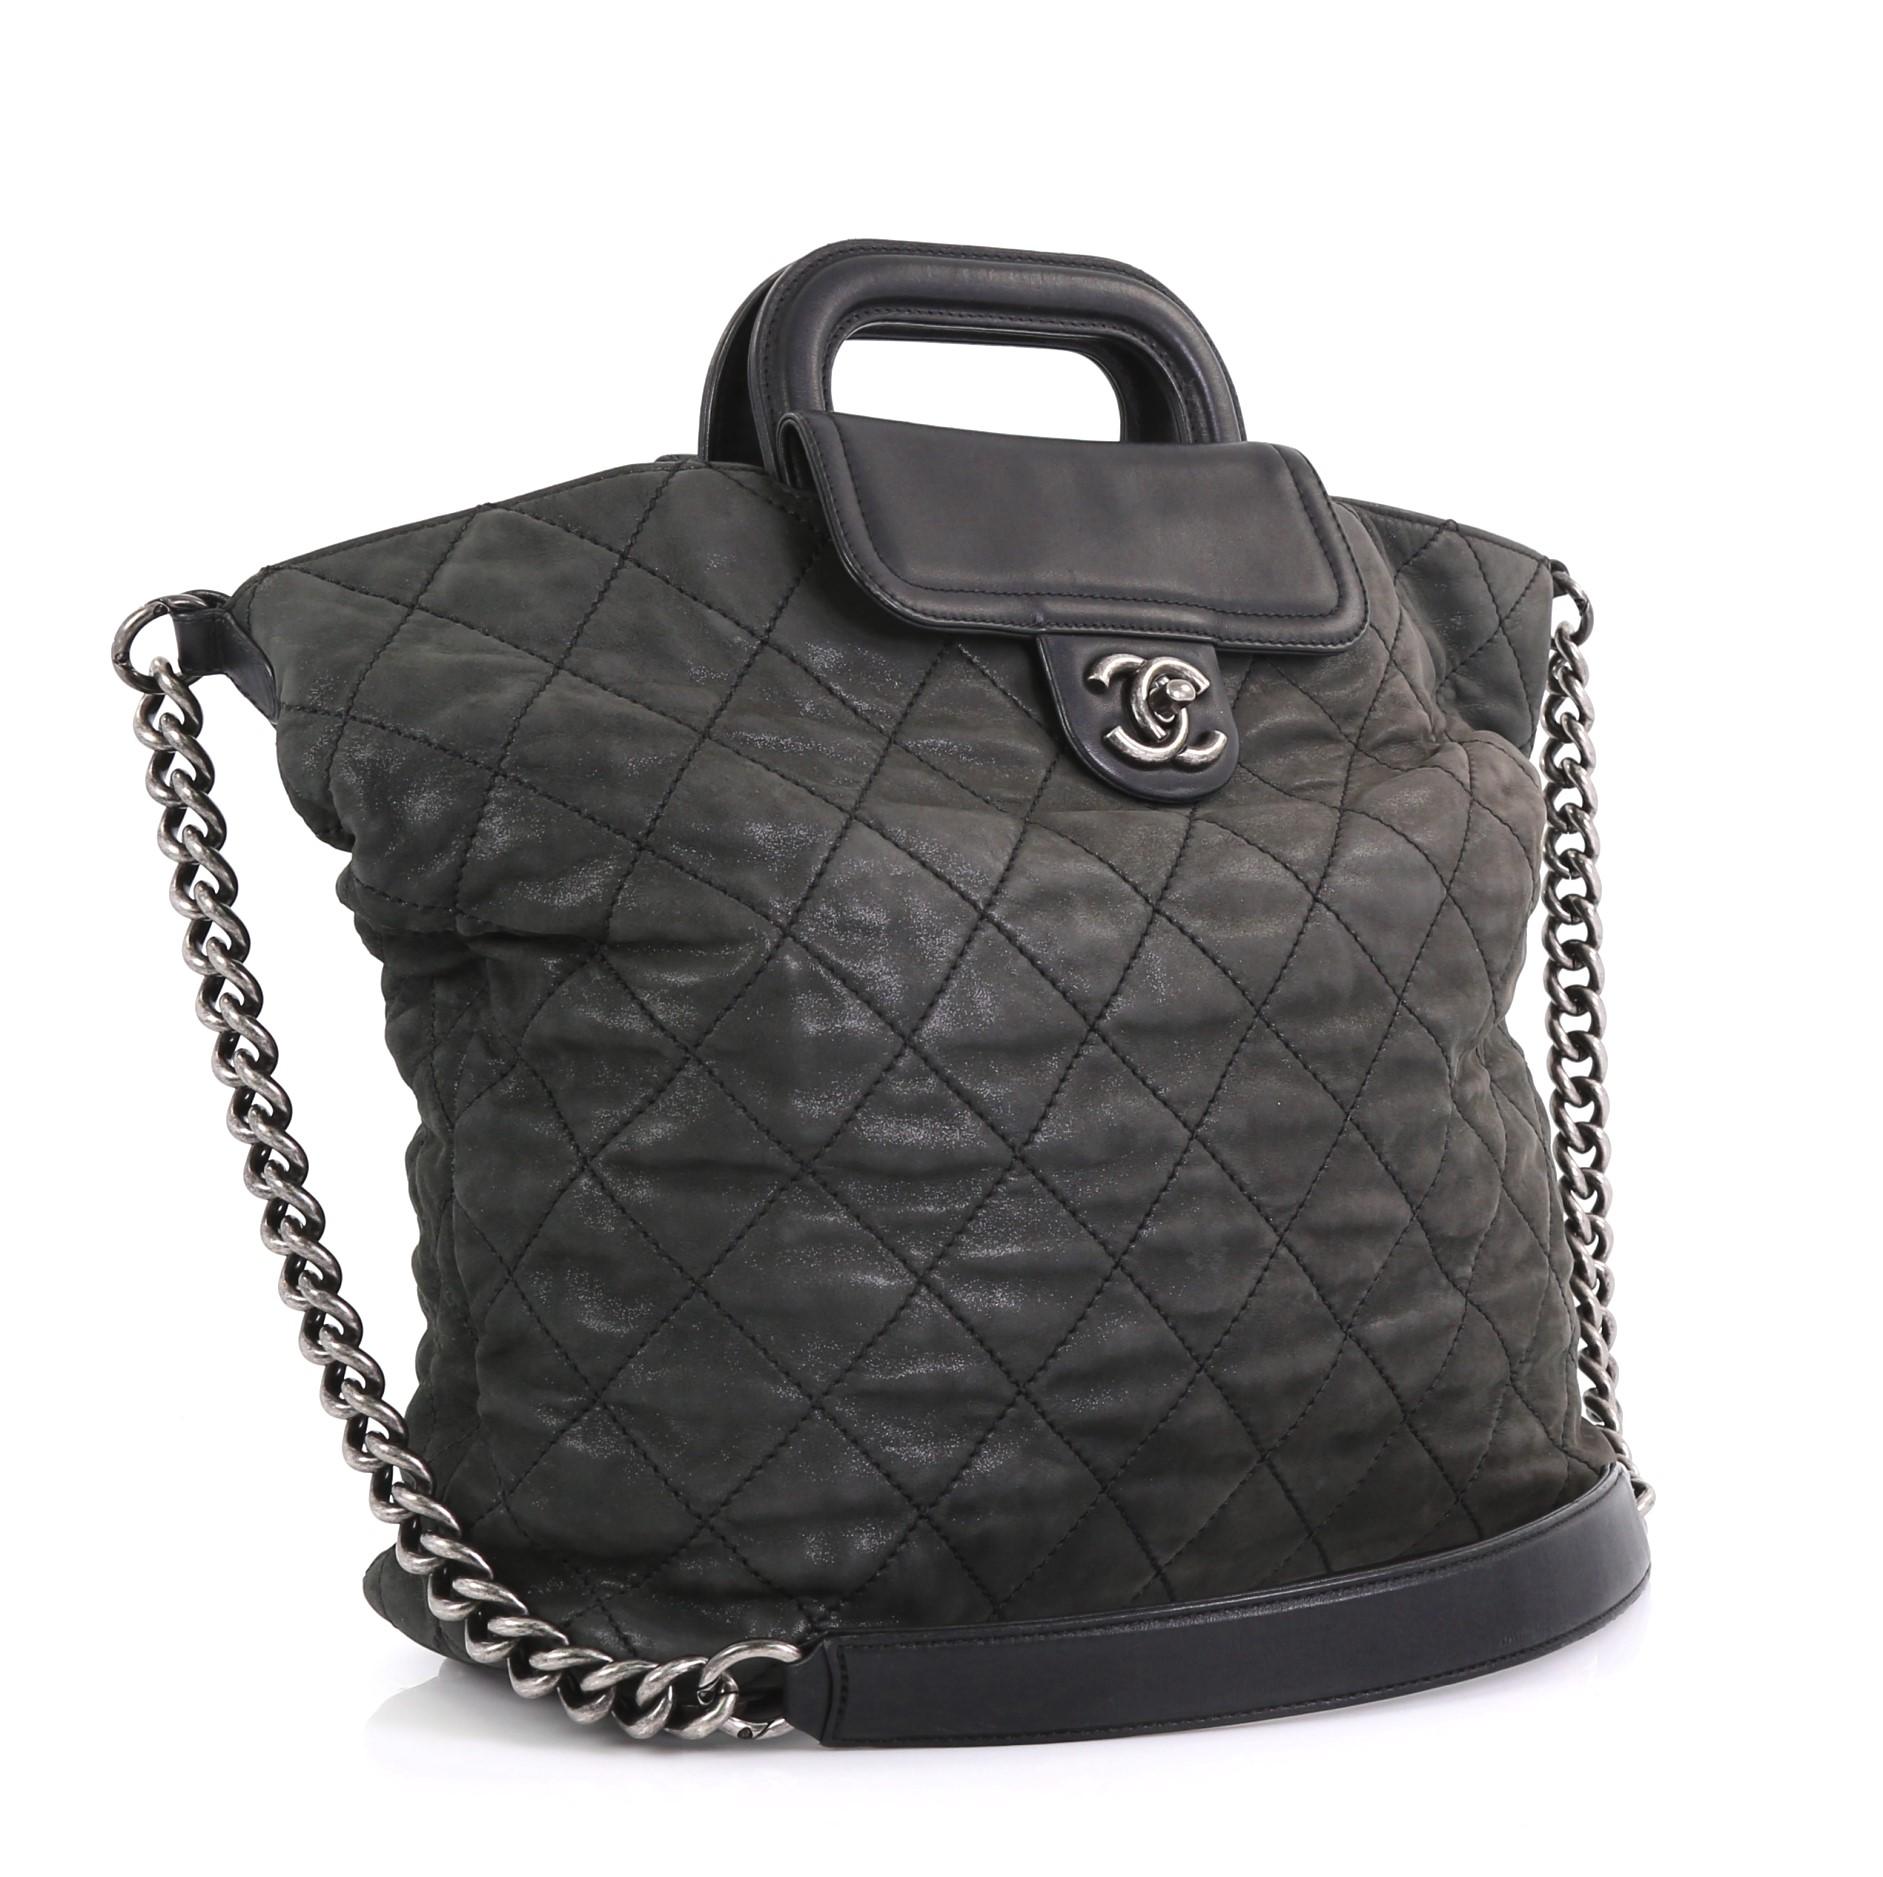 This Chanel In The Mix Shopping Tote Quilted Iridescent Calfskin Large, crated from black and green quilted iridescent calfskin leather, features dual top leather handles, chain link strap with leather pad, exterior front flap pocket with CC